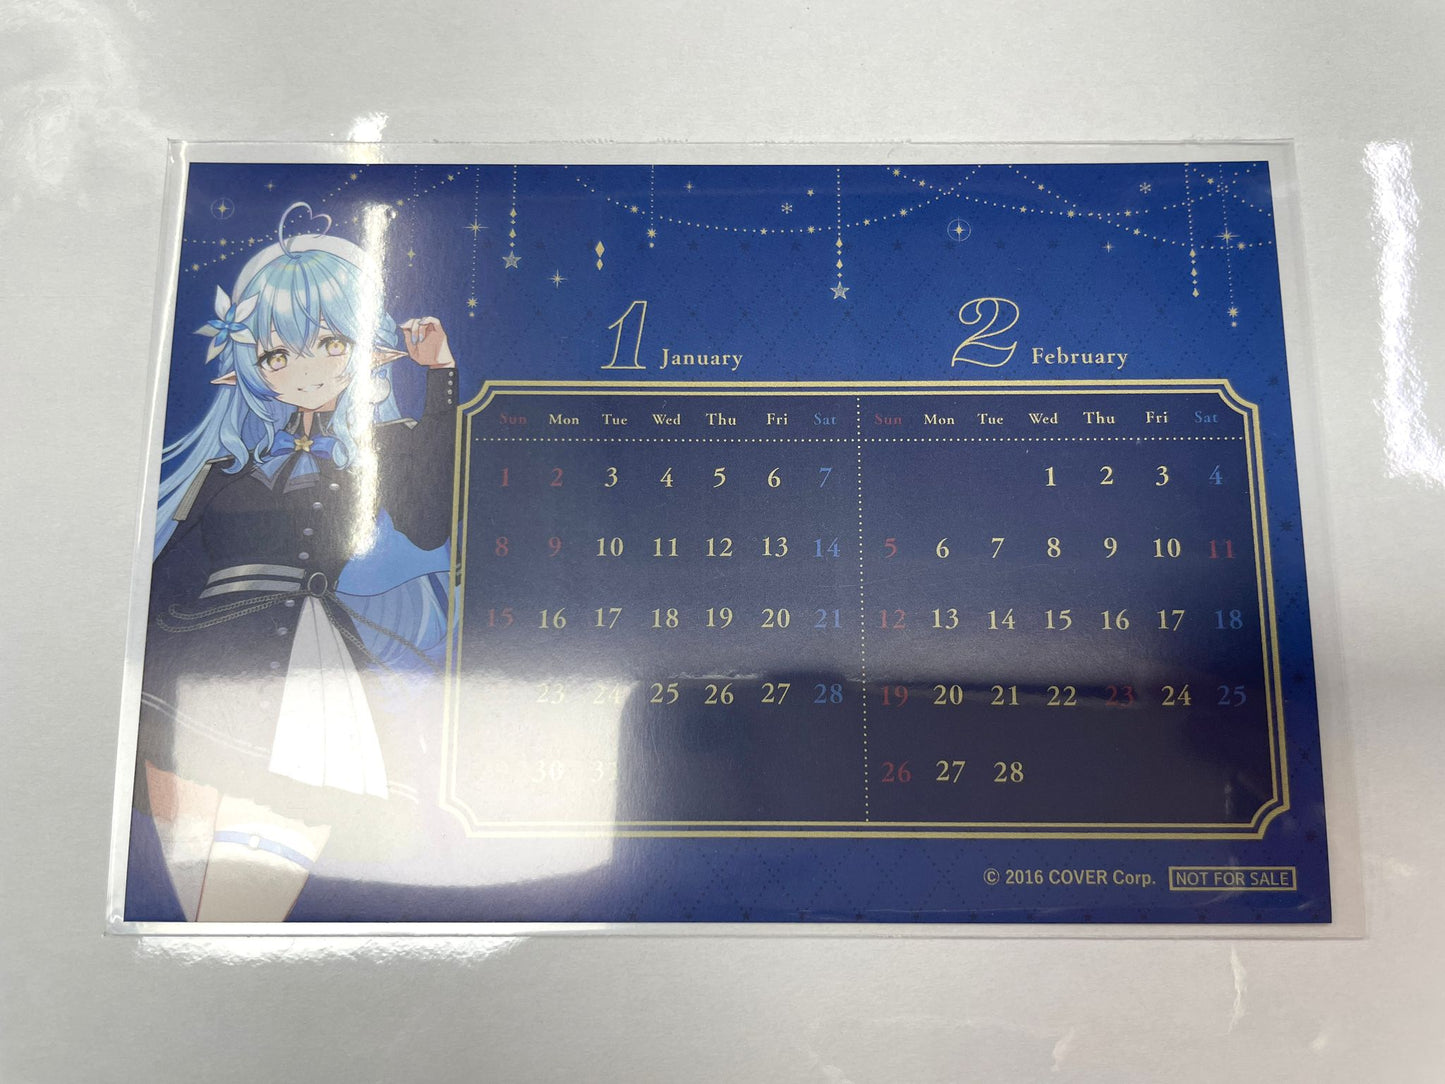 [In-stock]  Hololive x Tokyo Skytree Town (R) vol.2 Hololive2022－HOとする冬 Bonus postcard